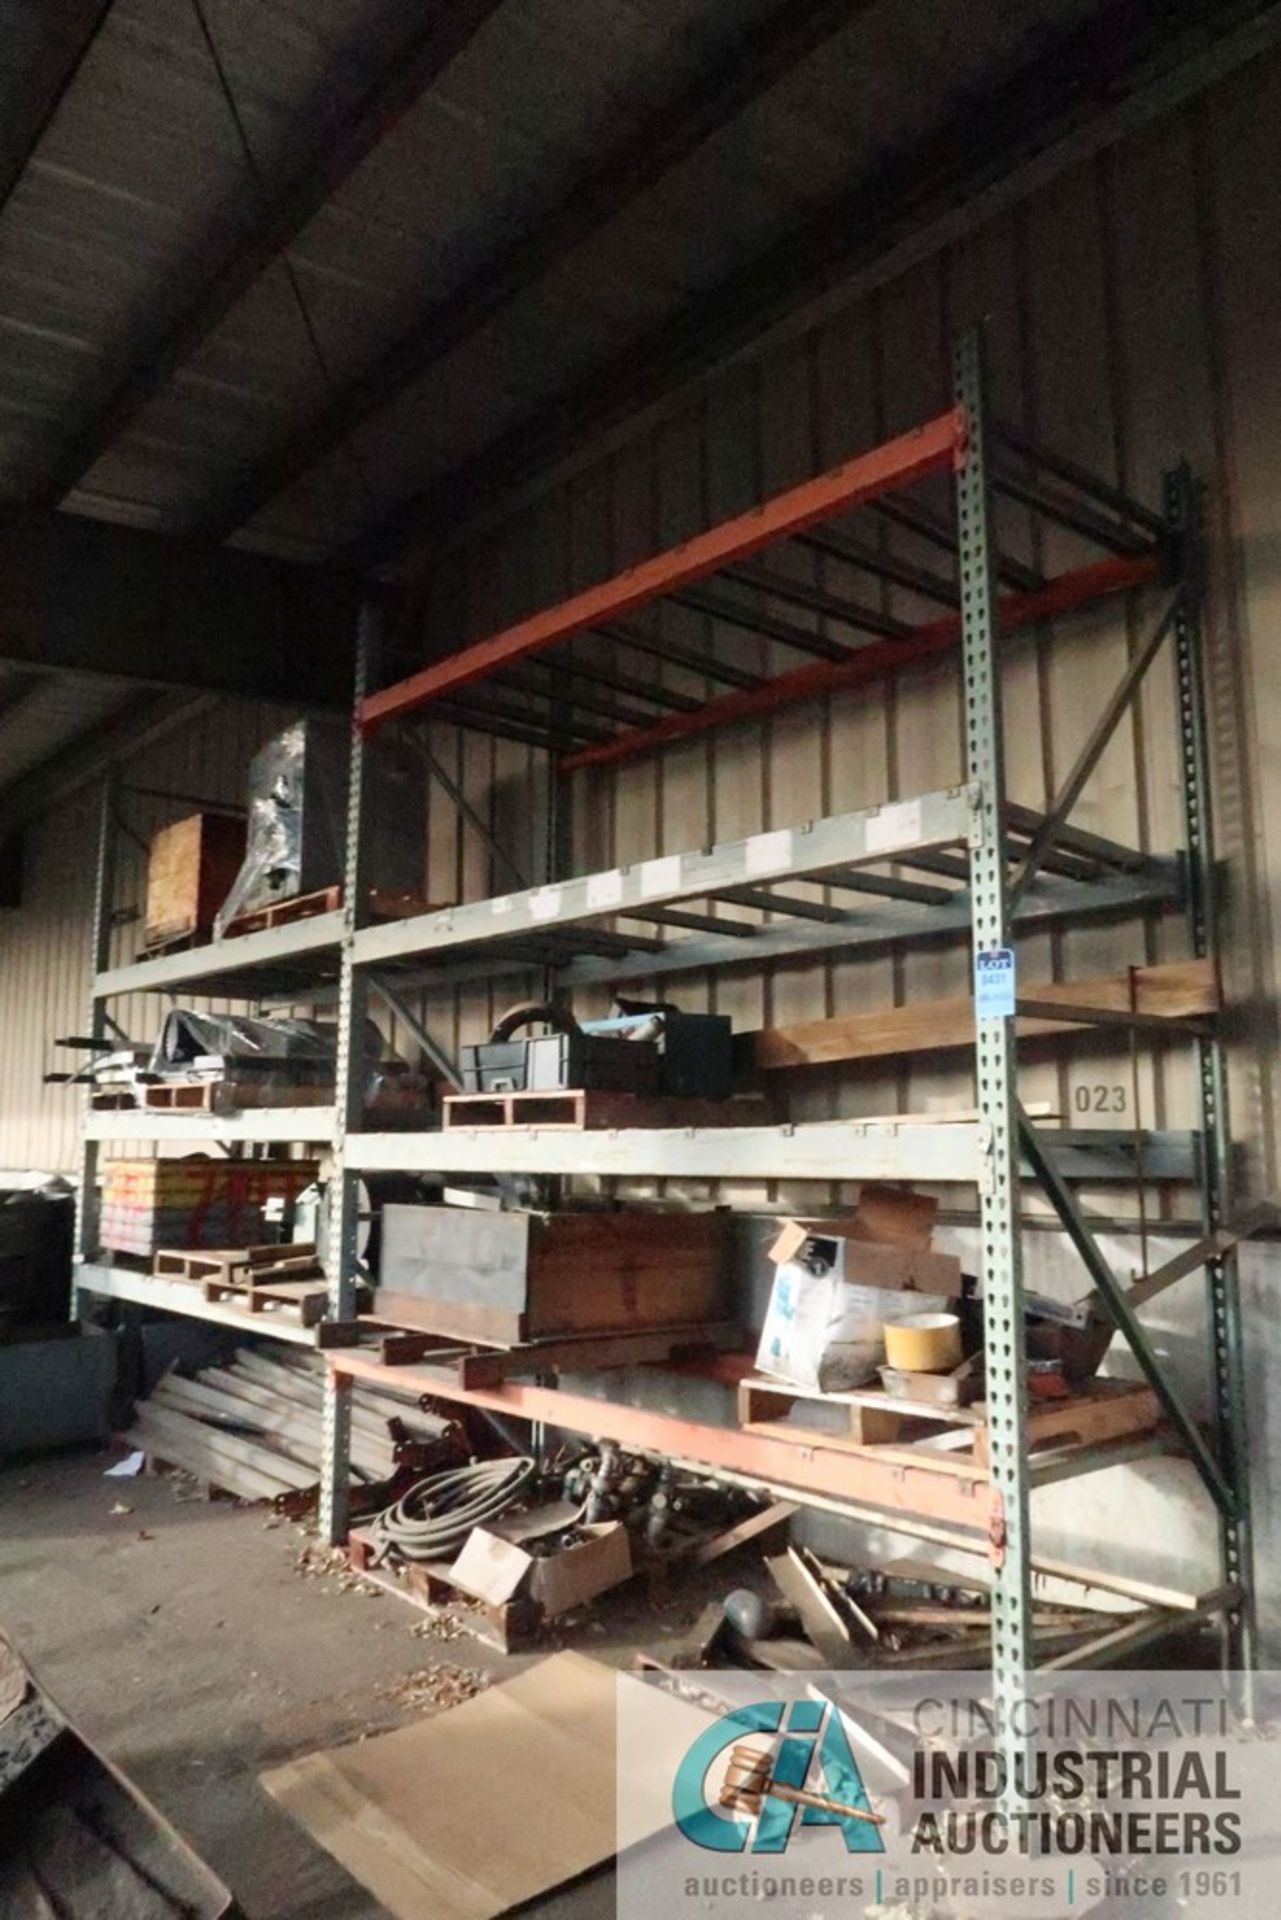 (LOT) MISCELLANEOUS PALLET RACK CONSISTING OF (2) SECTIONS 108" X 40" X 132" (1) SECTION 96" X 48" X